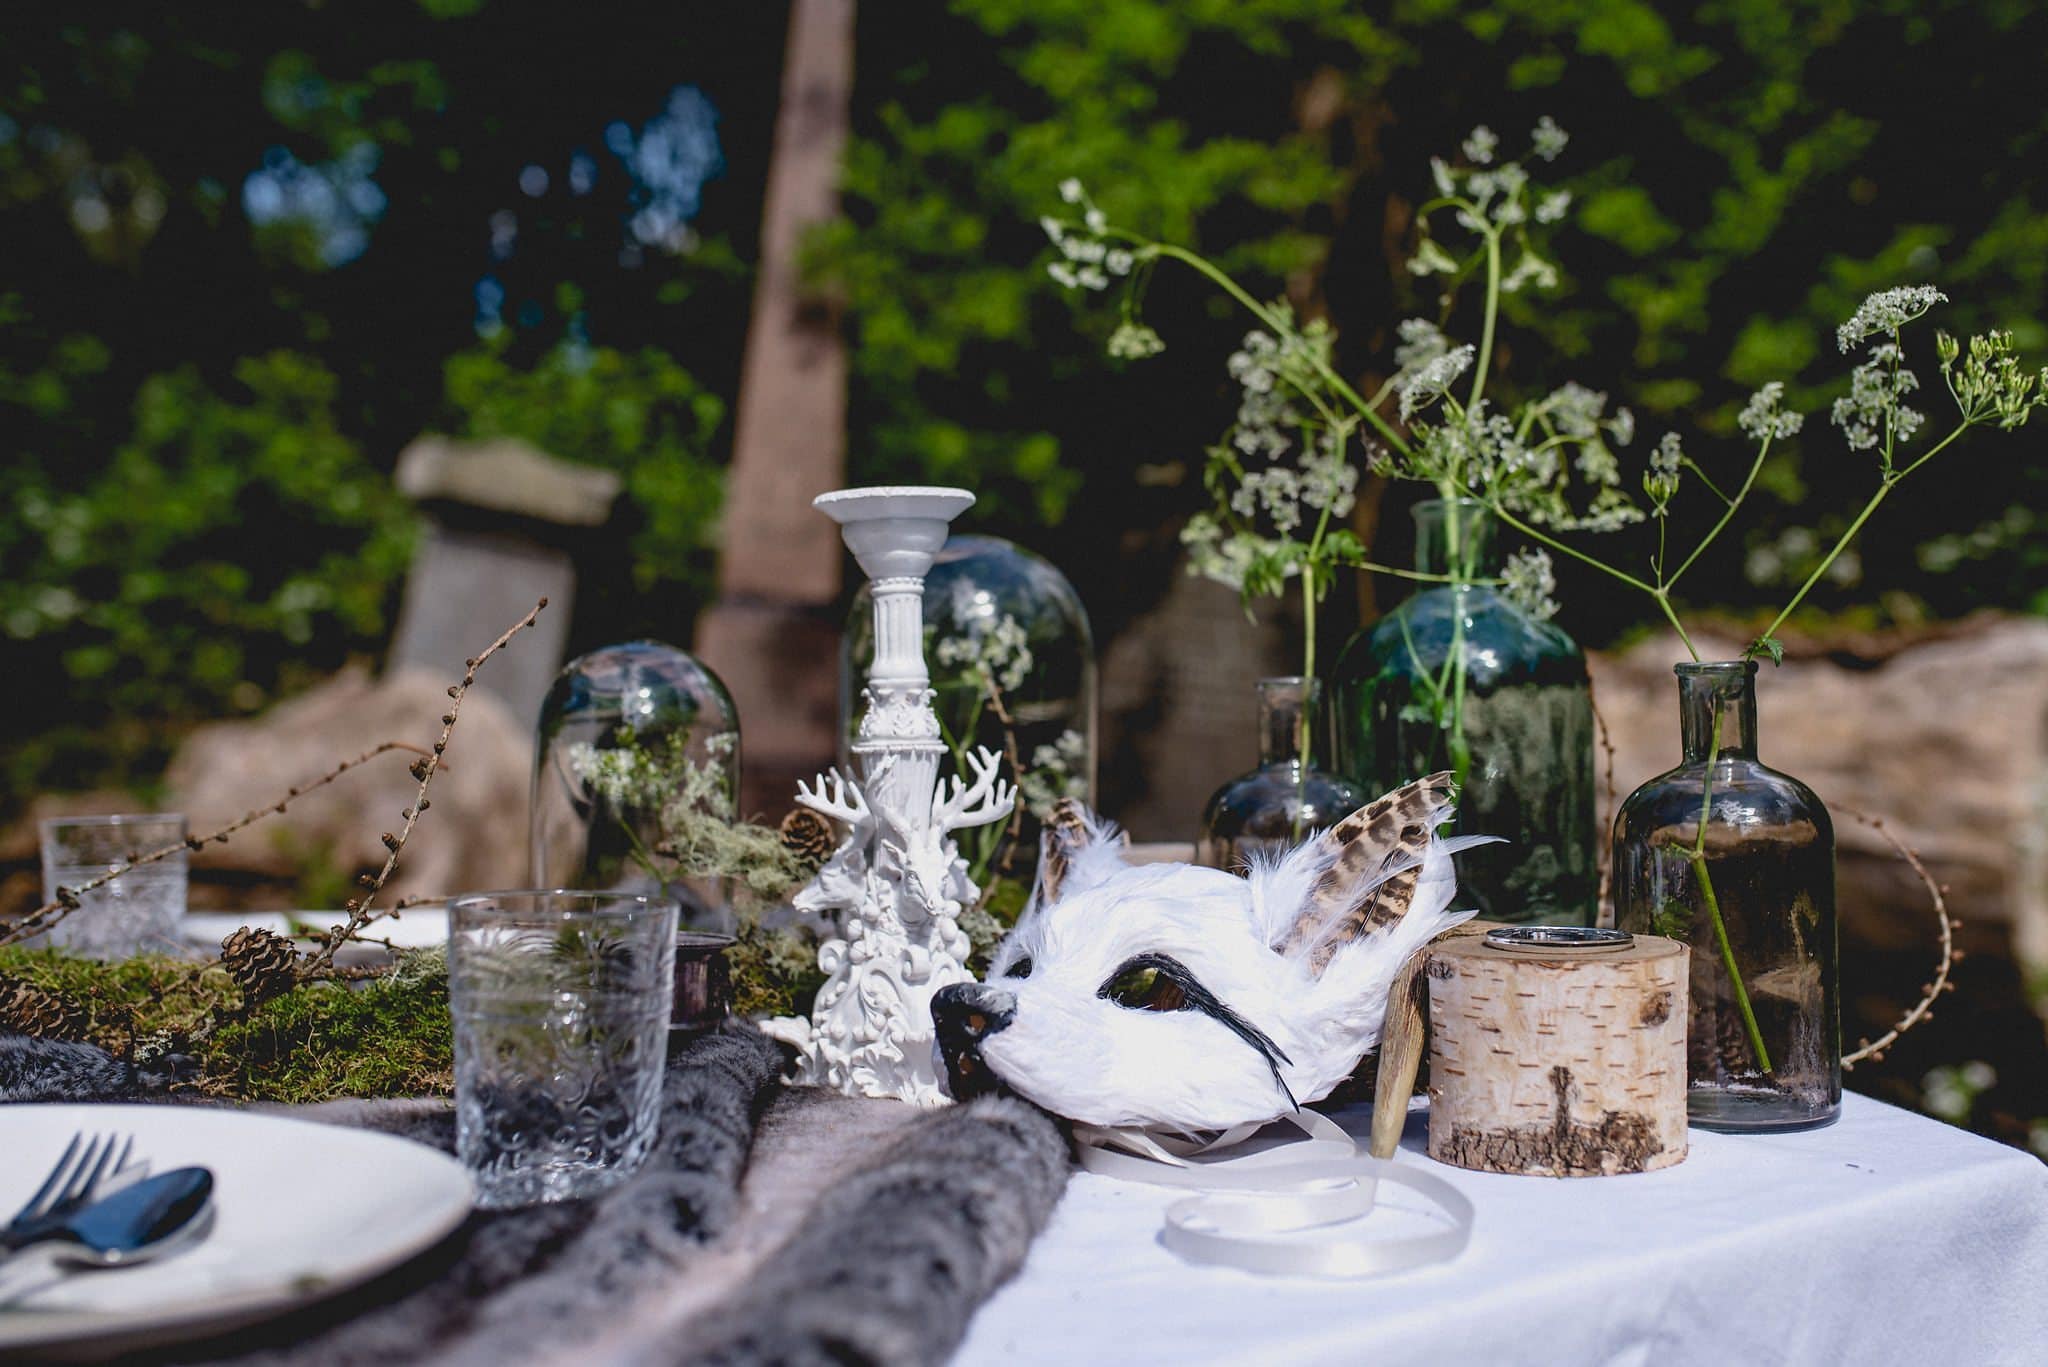 Elements of tablescape including white candlesticks and white feather fox mask